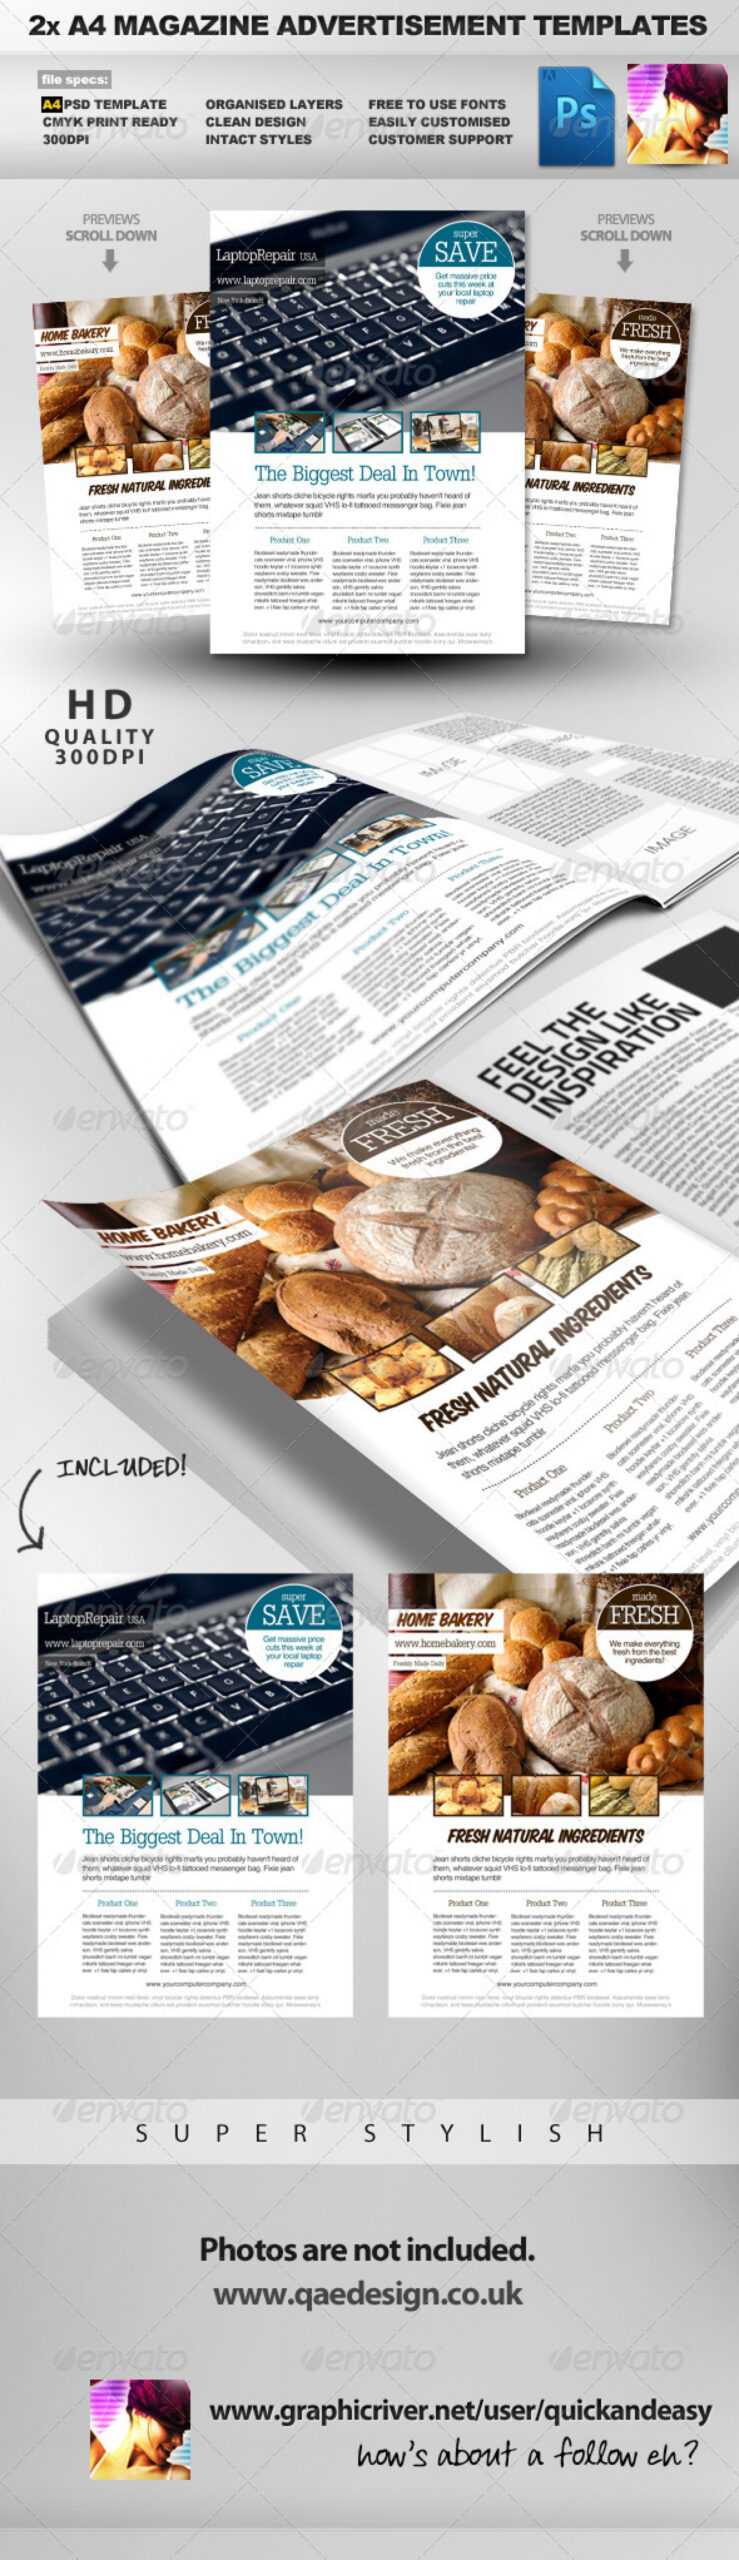 003 D7Henvd Intended For Magazine Ad Template Word